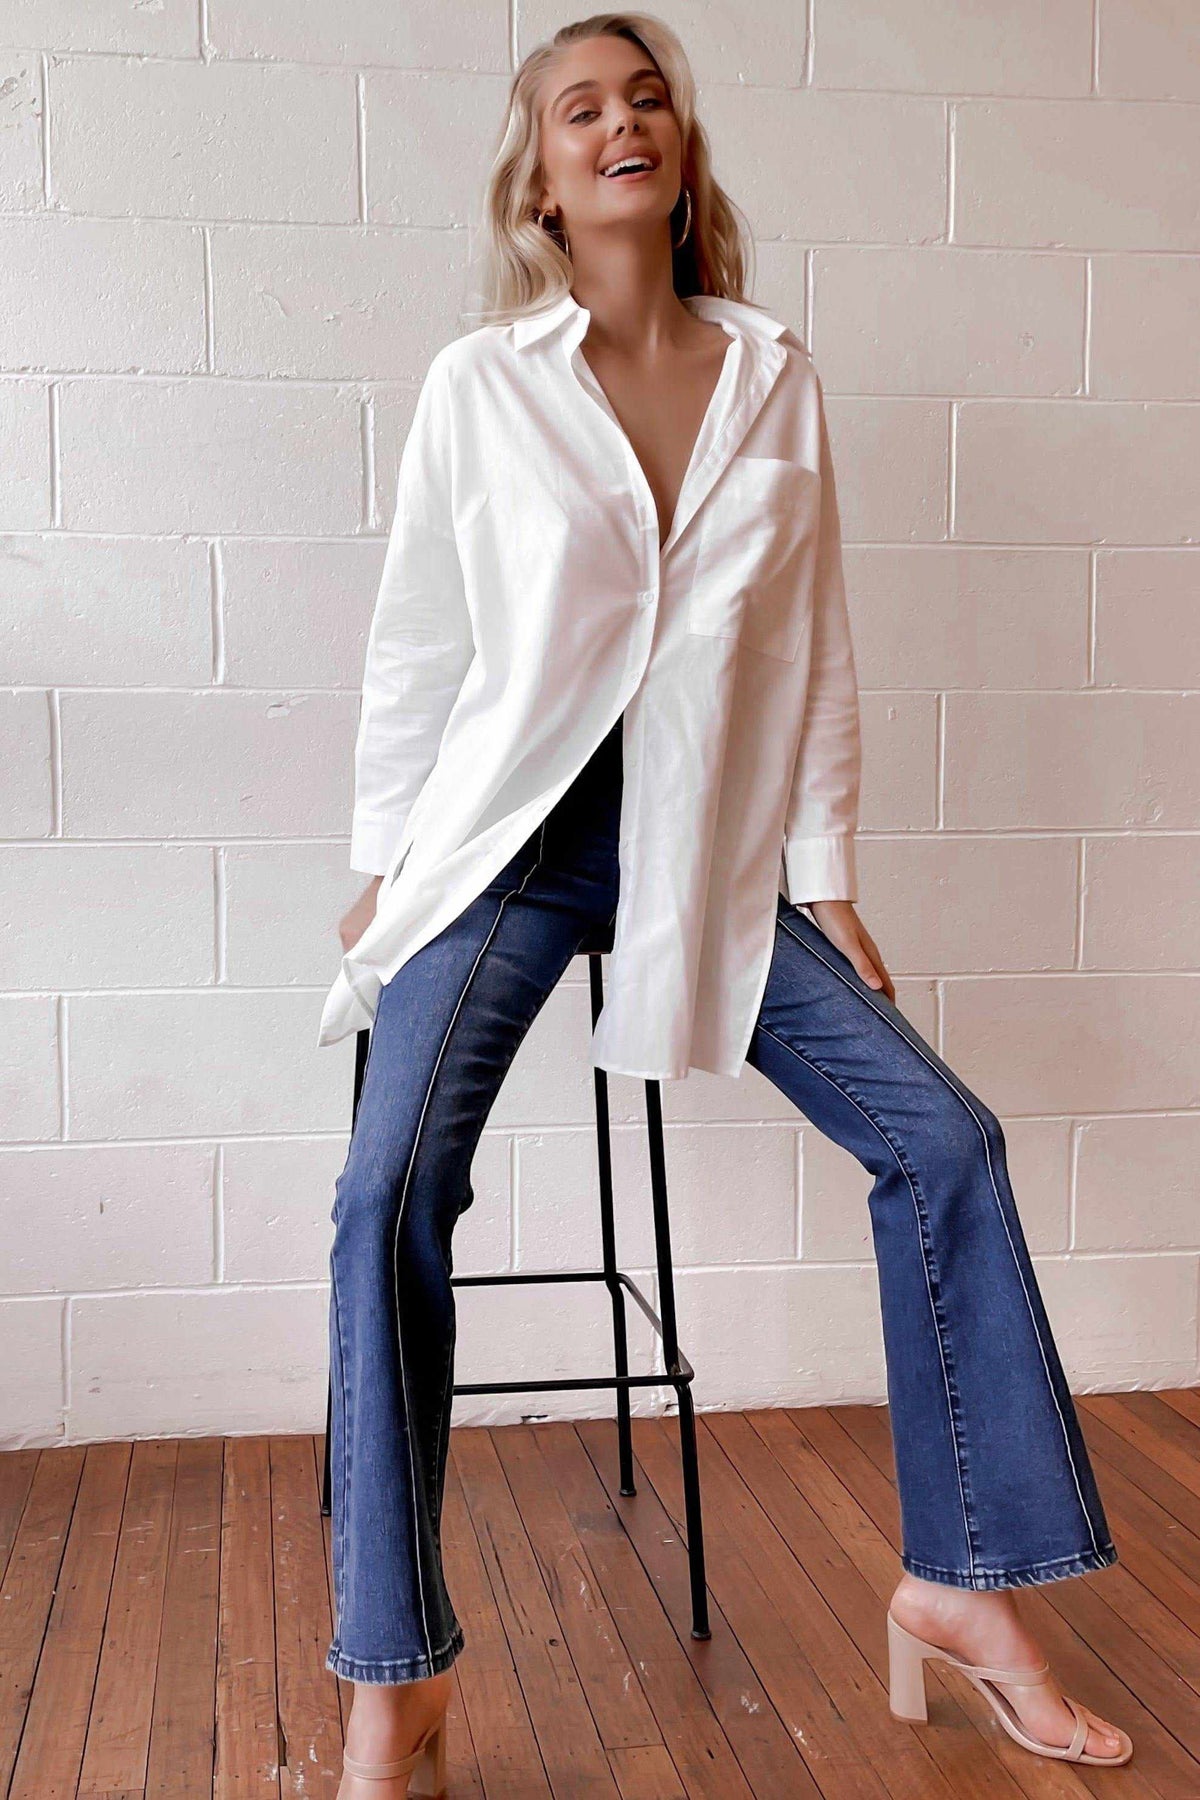 Varlita Top, COTTON, LONG SLEEVE, TOP, TOPS, WHITE, Our New Varlita Top Is Now Only $61.00 Exclusive At Mishkah, Our New Varlita Top is now only $61.00-We Have The Latest Women&#39;s Tops @ Mishkah Online Fashion Boutique-MISHKAH